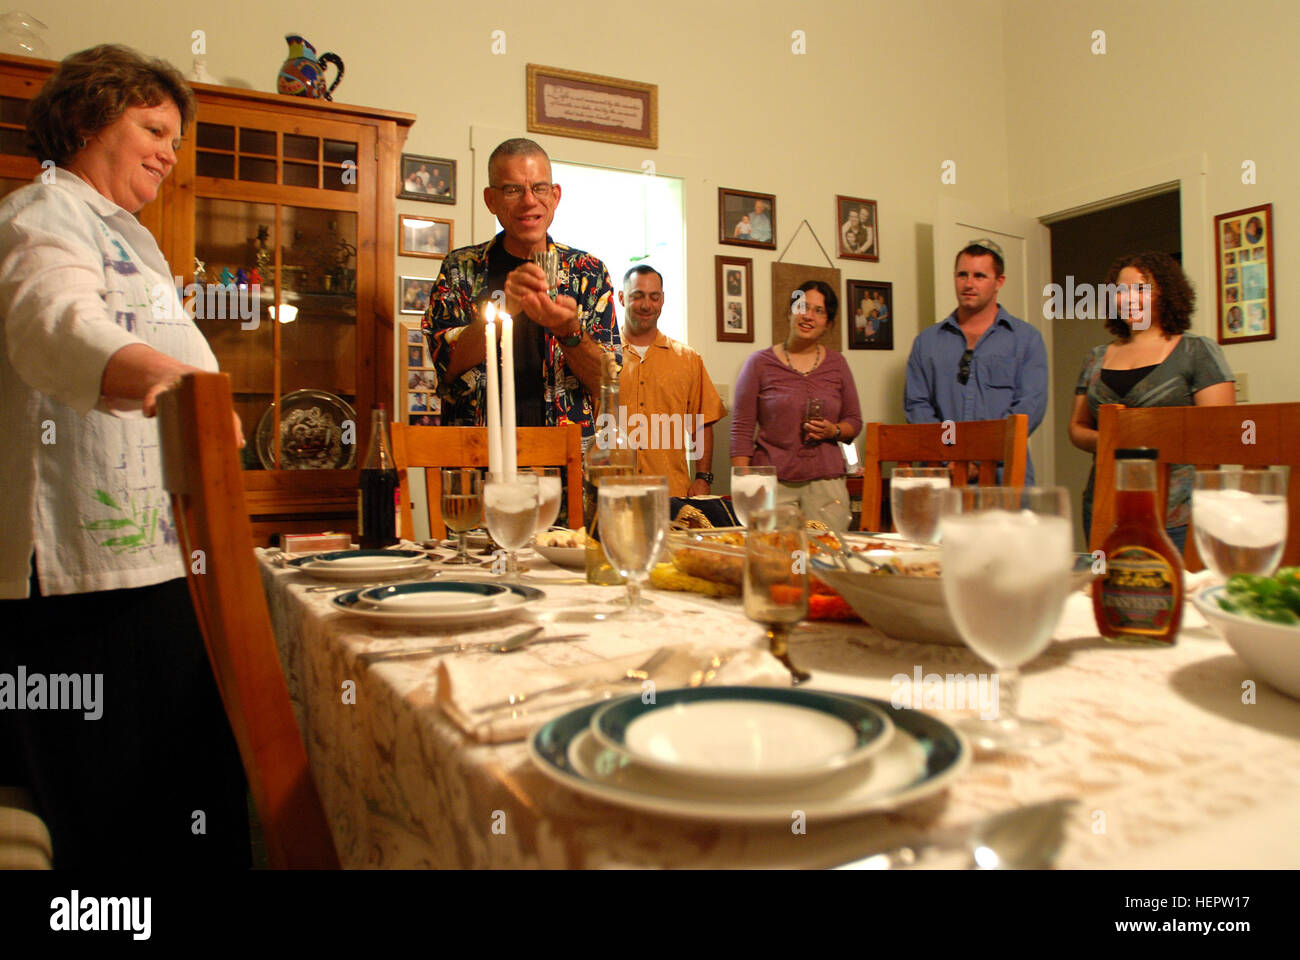 GUANTANAMO BAY, Cuba – Navy Chaplain Rabbi Seth Phillips prays over the Kos L’Kiddush, or Kiddush cup, before a Shabbat dinner at the naval station residence of Jeff and Kathy Einhorn Friday, Sept. 26, 2008. Kathy Einhorn is seen at left. Phillips, a chaplain stationed at Naples, Italy, is visiting Guantanamo Bay for a week to help celebrate Rosh Hashanah, the Jewish new year which began Sept. 29. Shabbat is a Friday night dinner, the main meal of the week in many Jewish households, and begins after sundown to welcome the Jewish Sabbath. JTF Guantanamo conducts safe, humane, legal and transpar Stock Photo